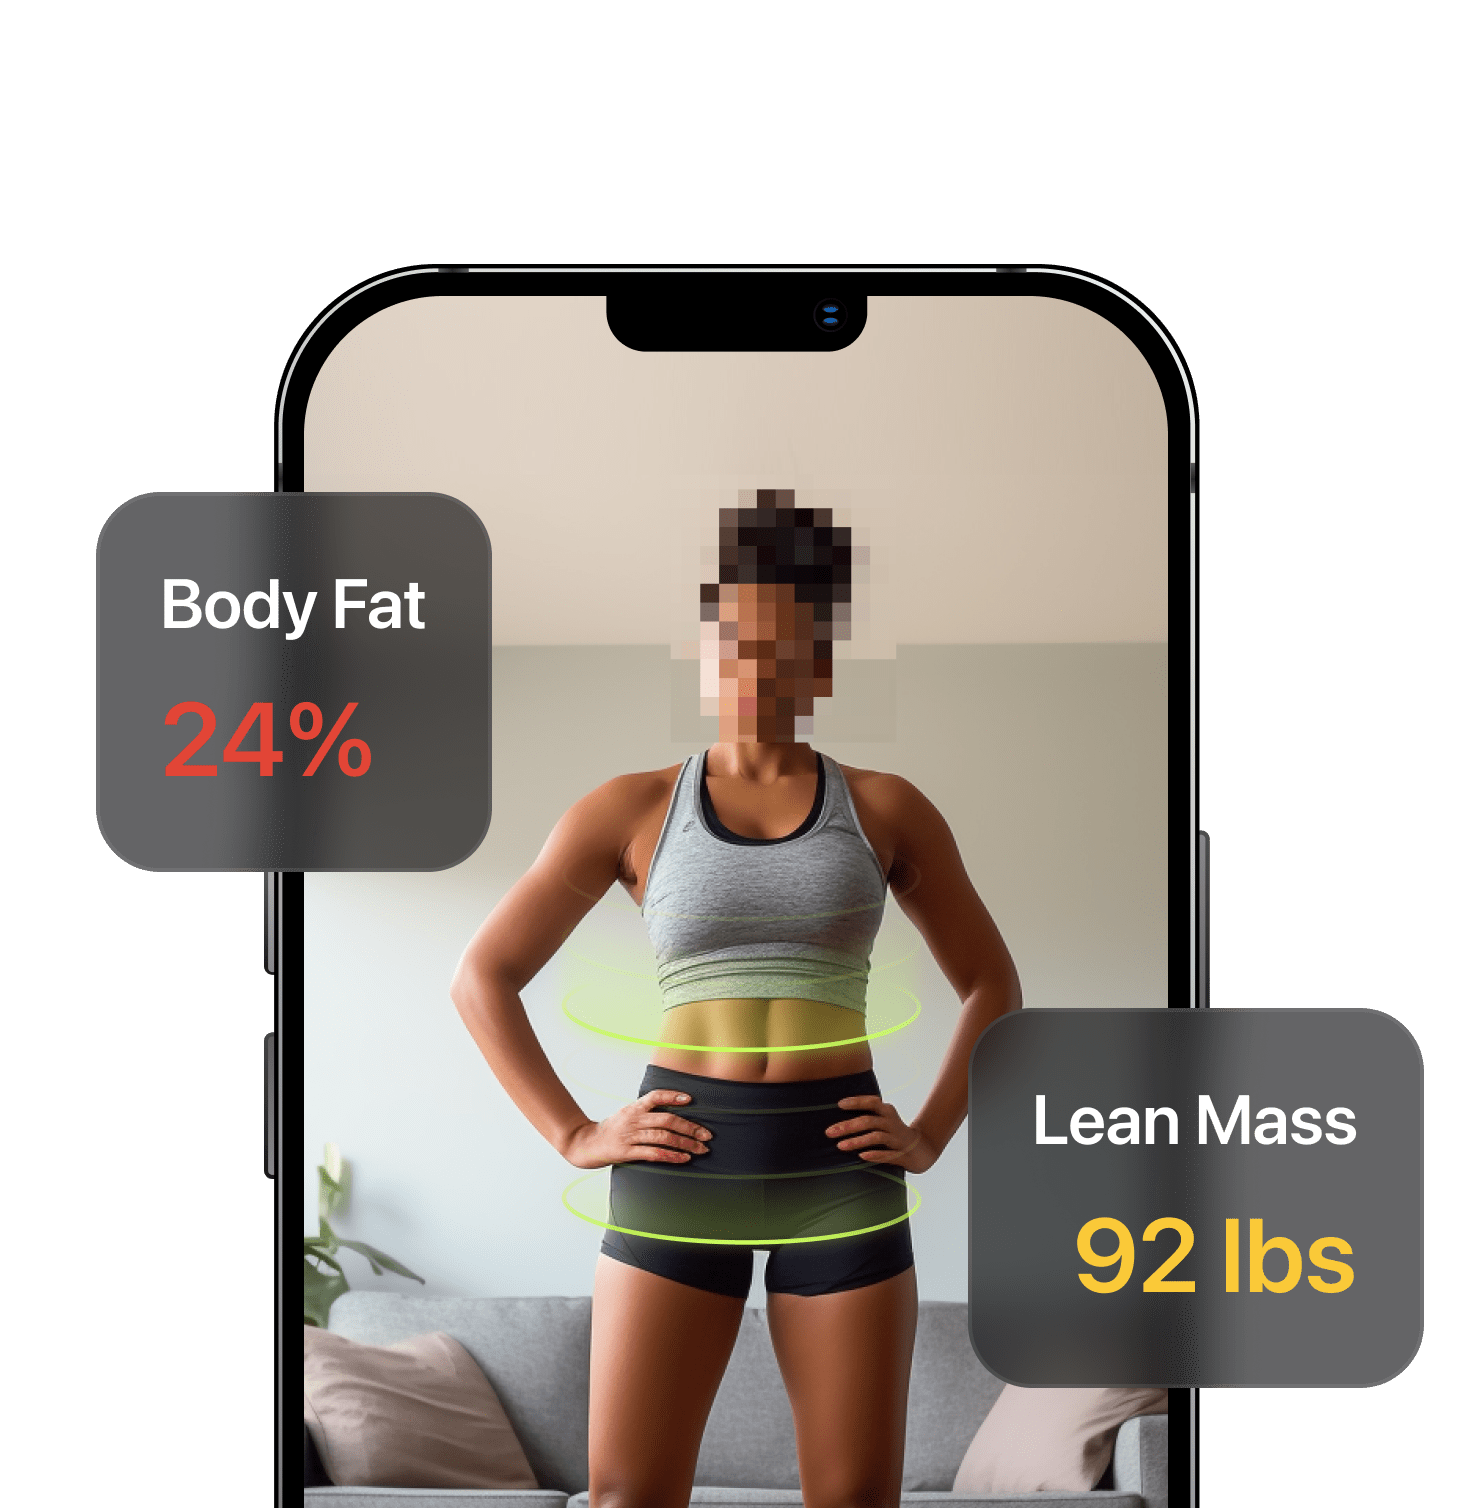 Getting the most from your body scanner